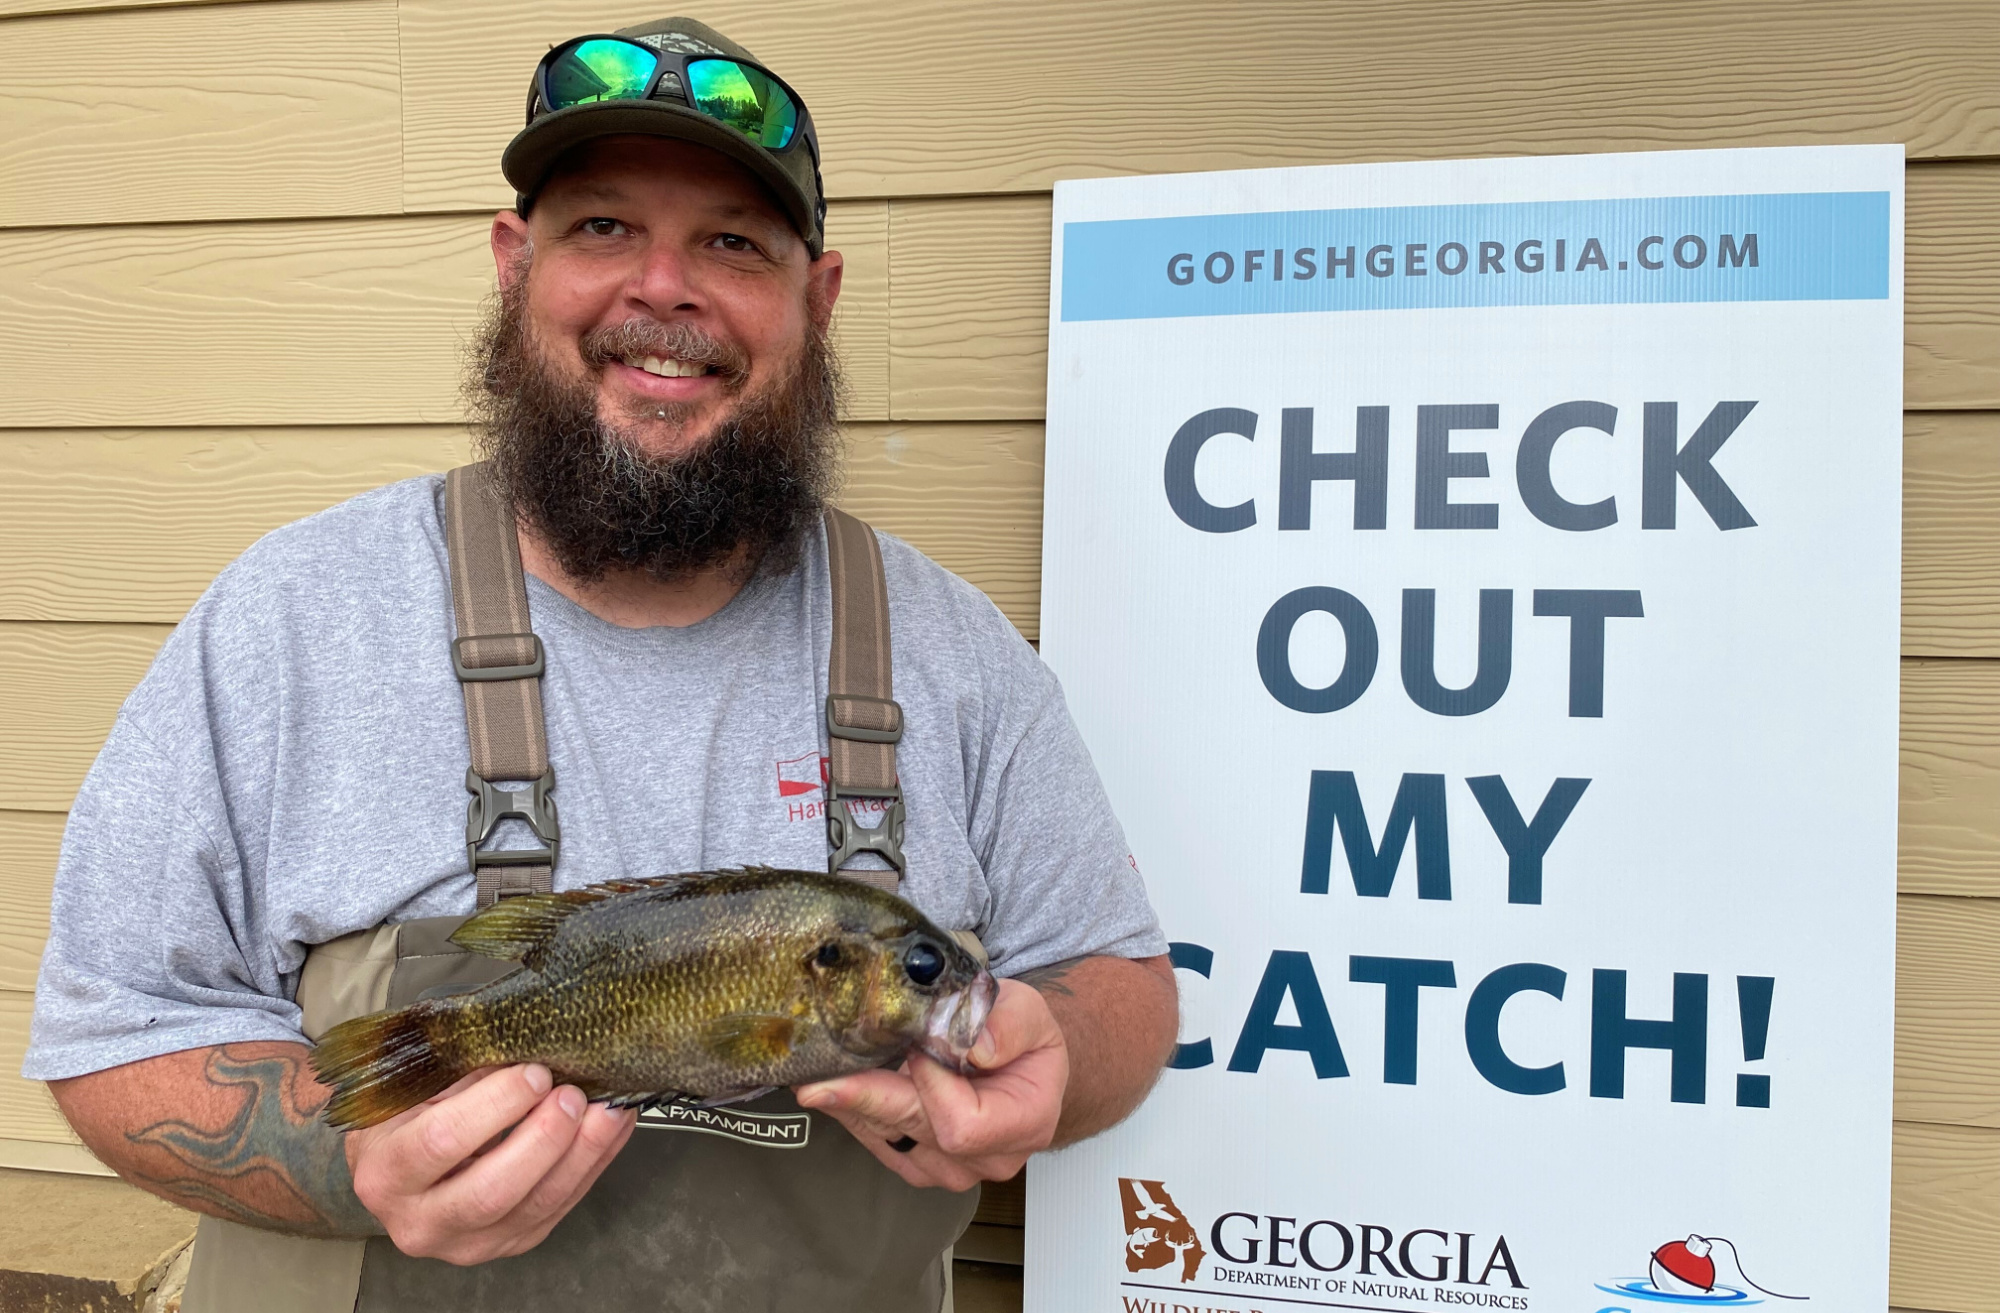 Georgia Angler Sets State's First Rock Bass Record